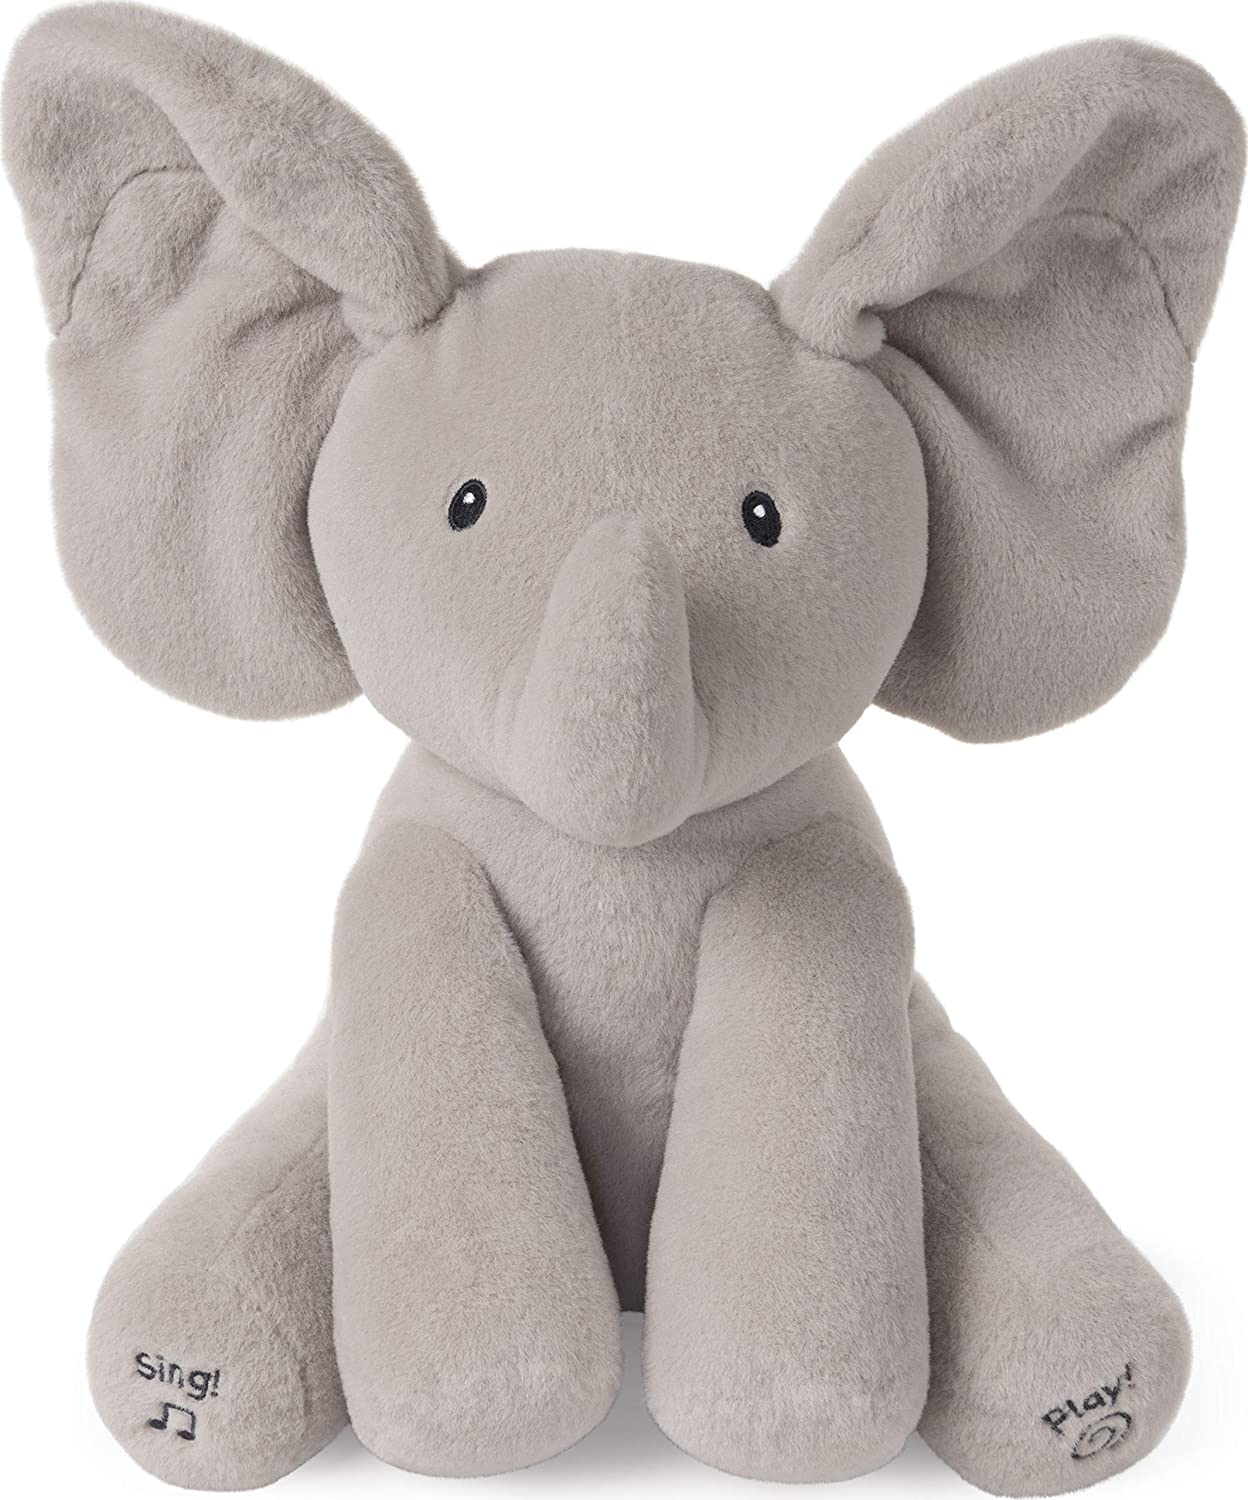 Interactive, Fun and Cuddly Elephant Plush